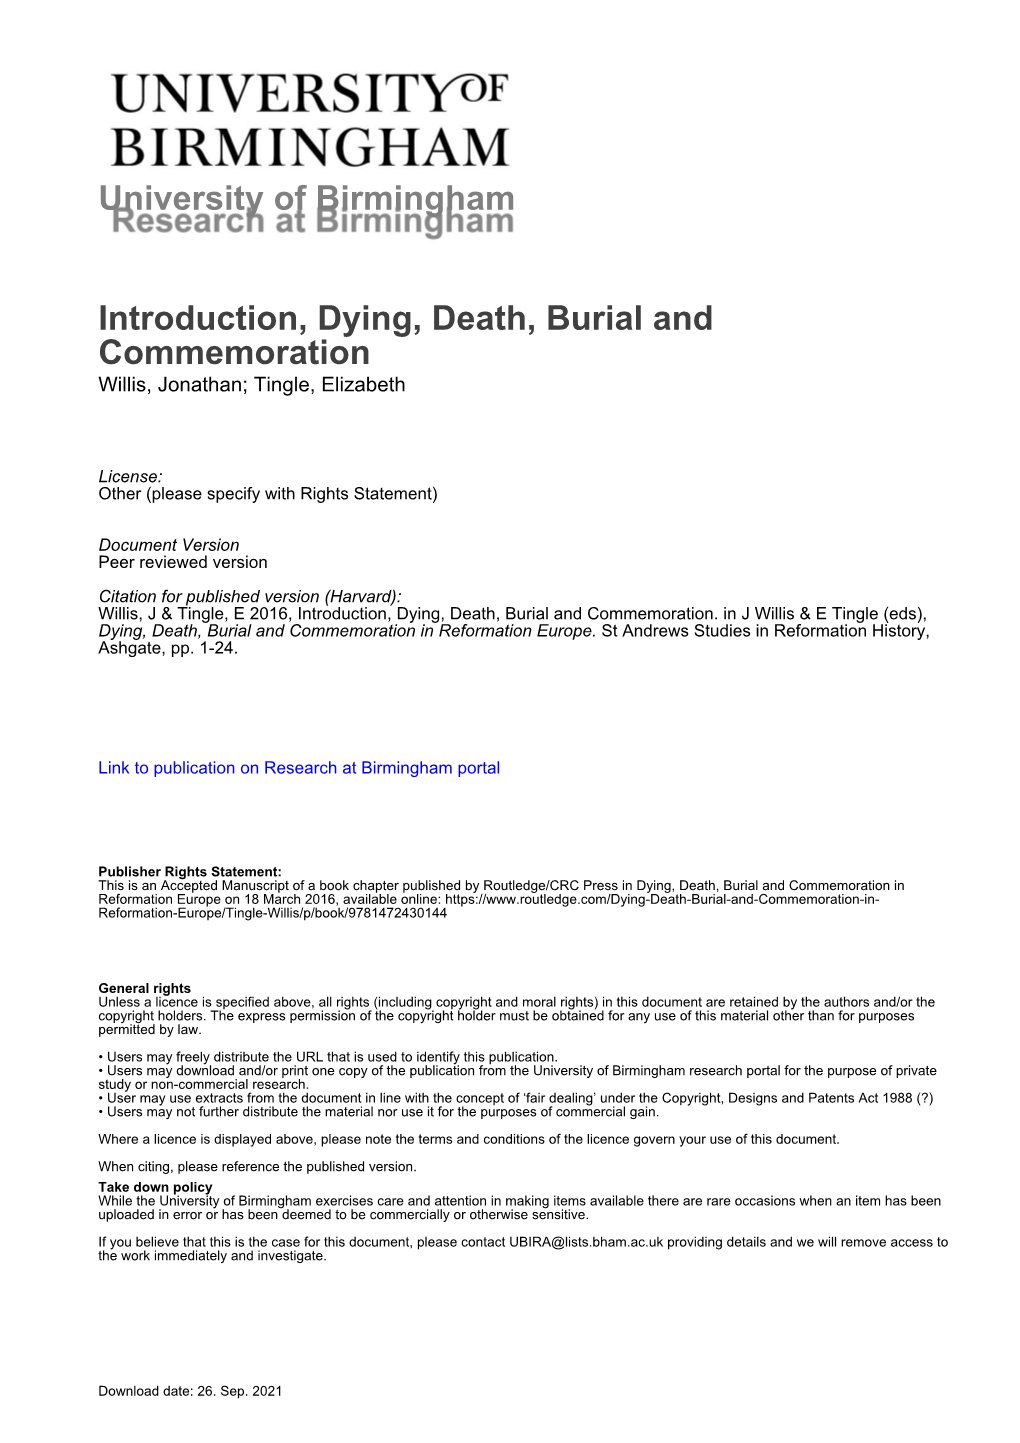 University of Birmingham Introduction, Dying, Death, Burial and Commemoration